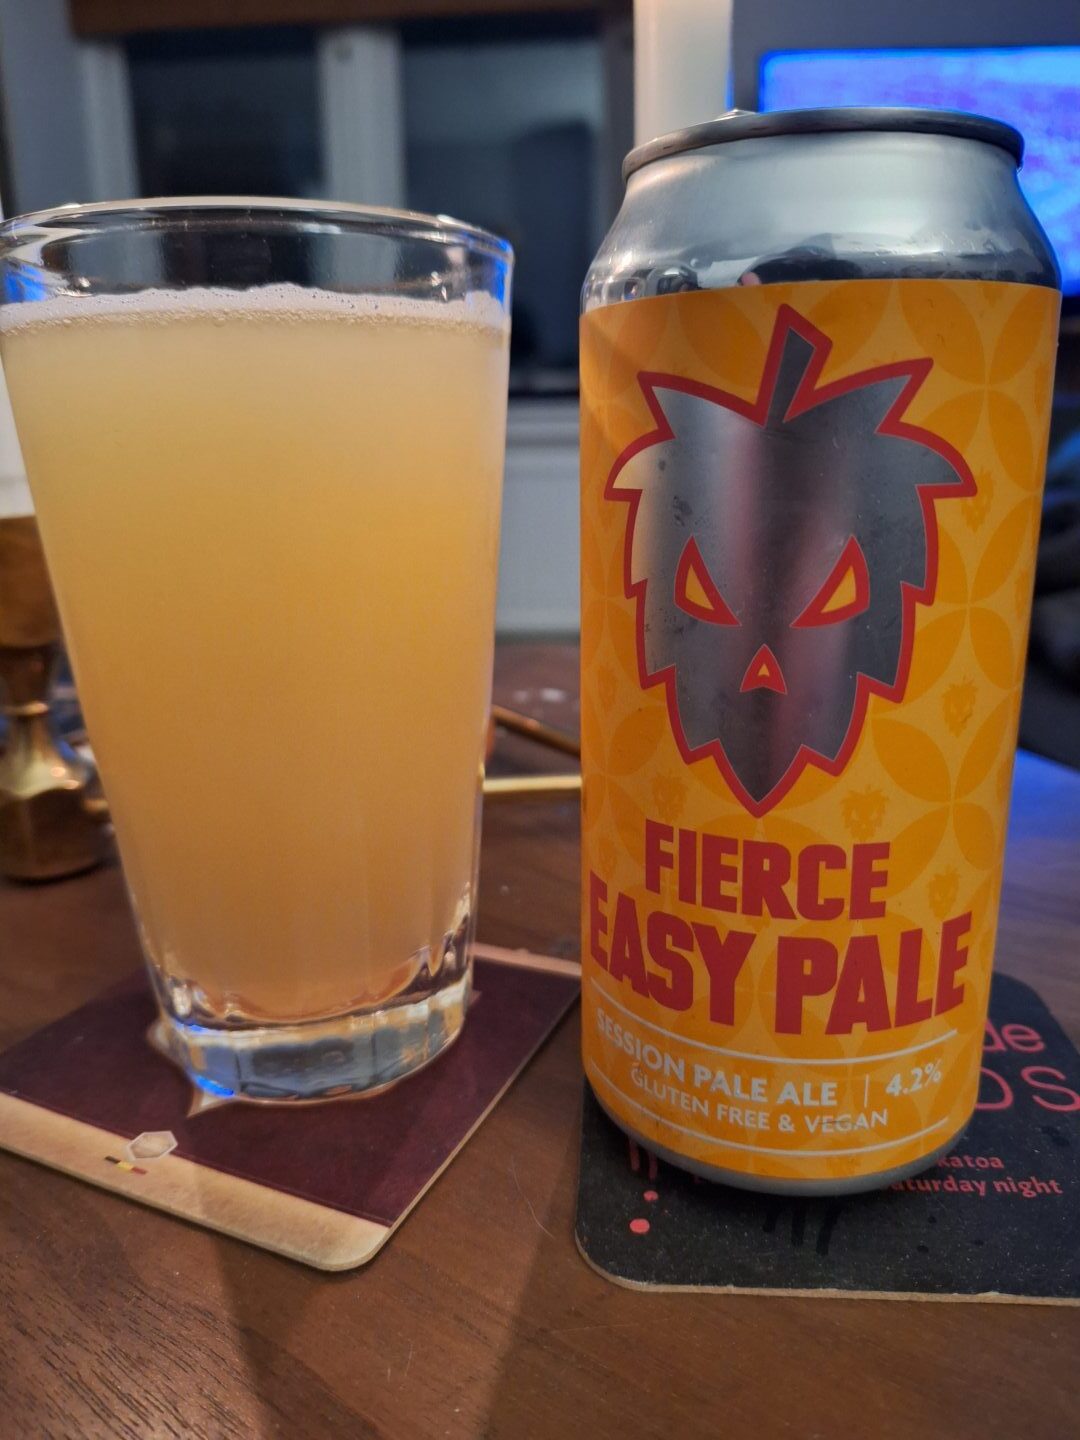 A can of Fierce's Easy Pale poured into a glass